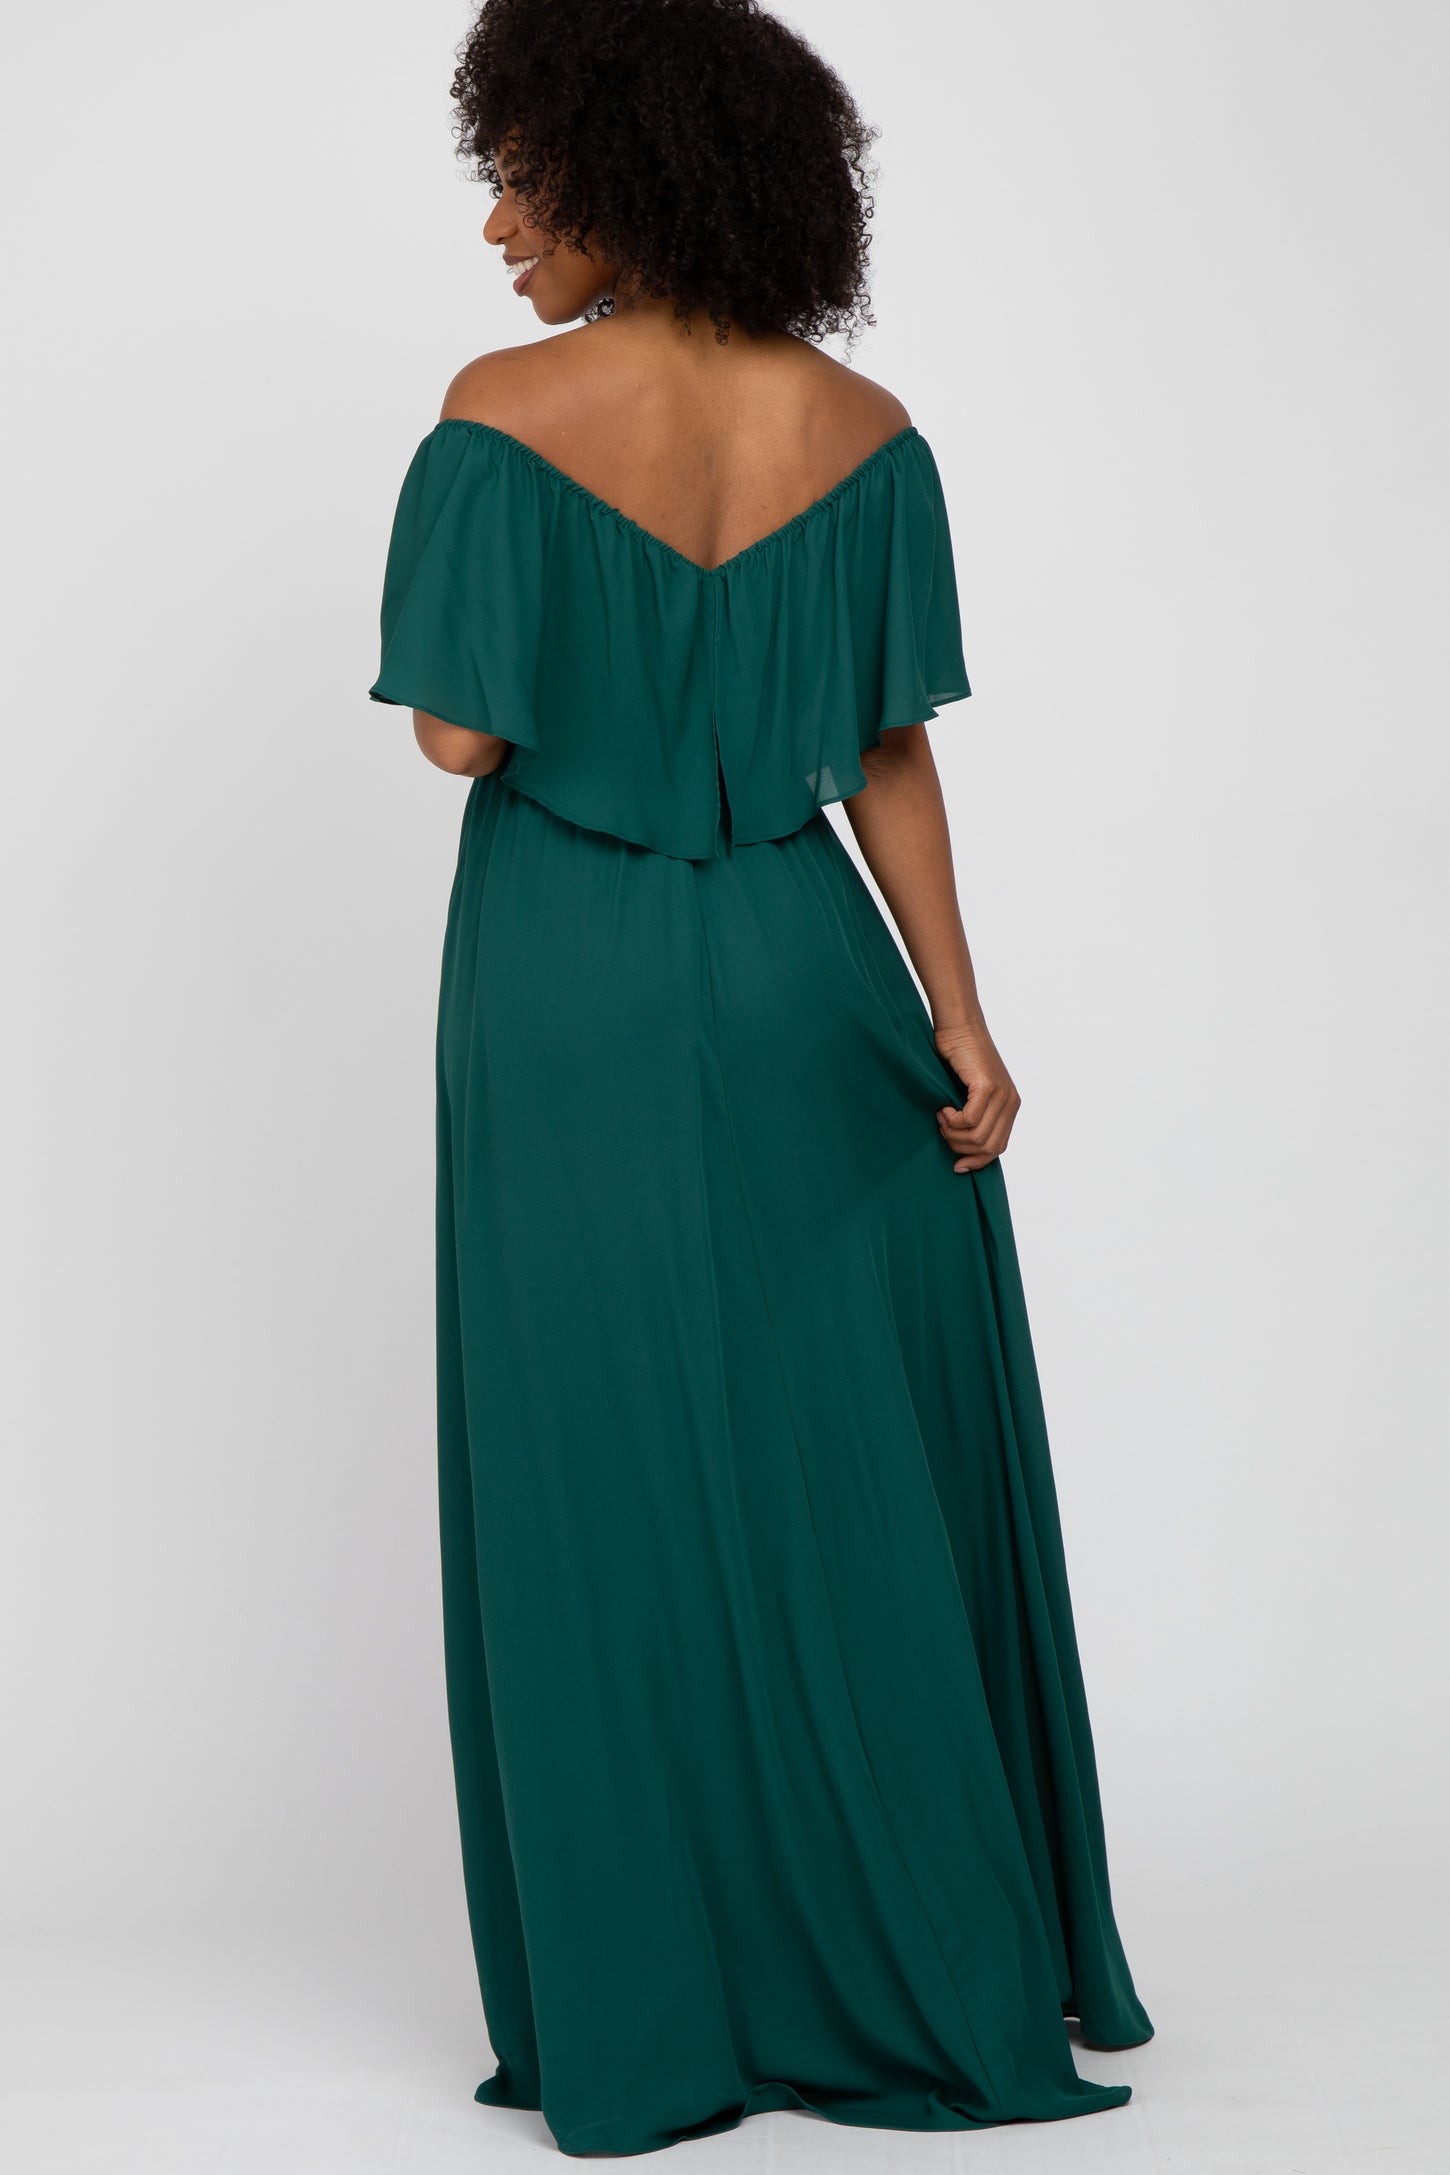 Forest Green Chiffon Off Shoulder Gown– PinkBlush